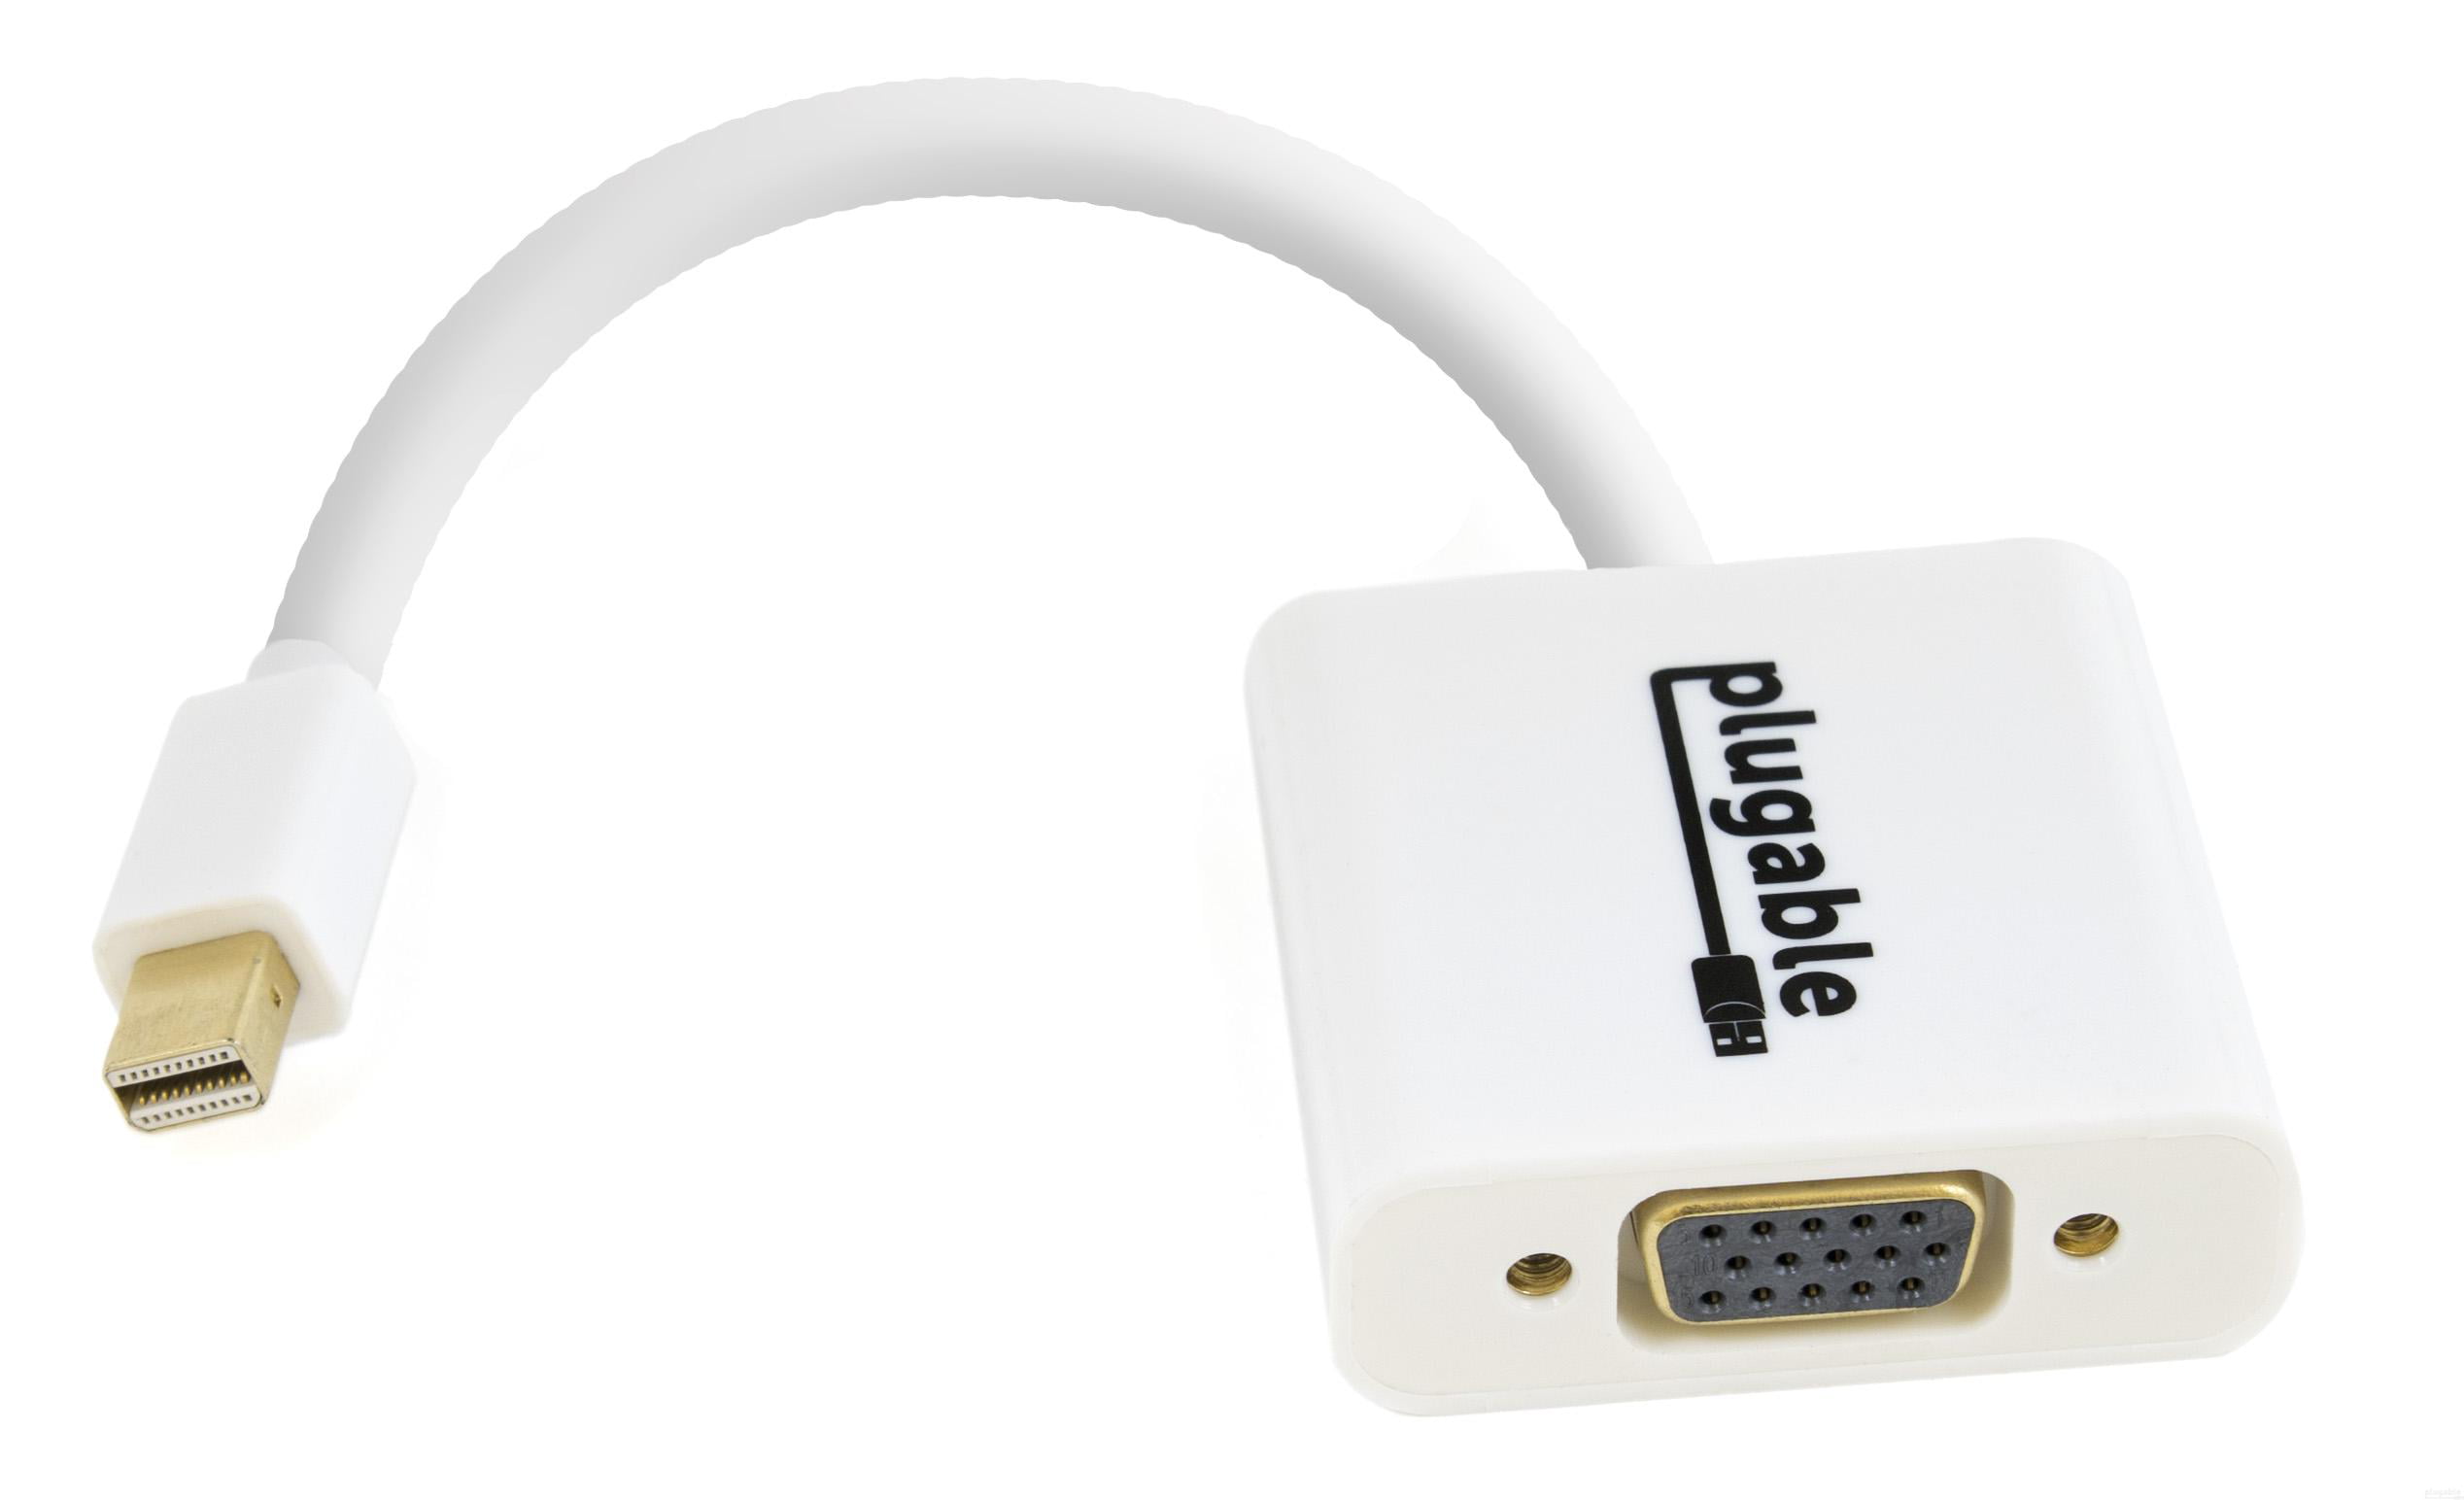 Plugable DisplayPort (Thunderbolt 2) to VGA Adapter (Supports Mac, Windows, Linux Systems and up 1920x1080, Active) - Walmart.com